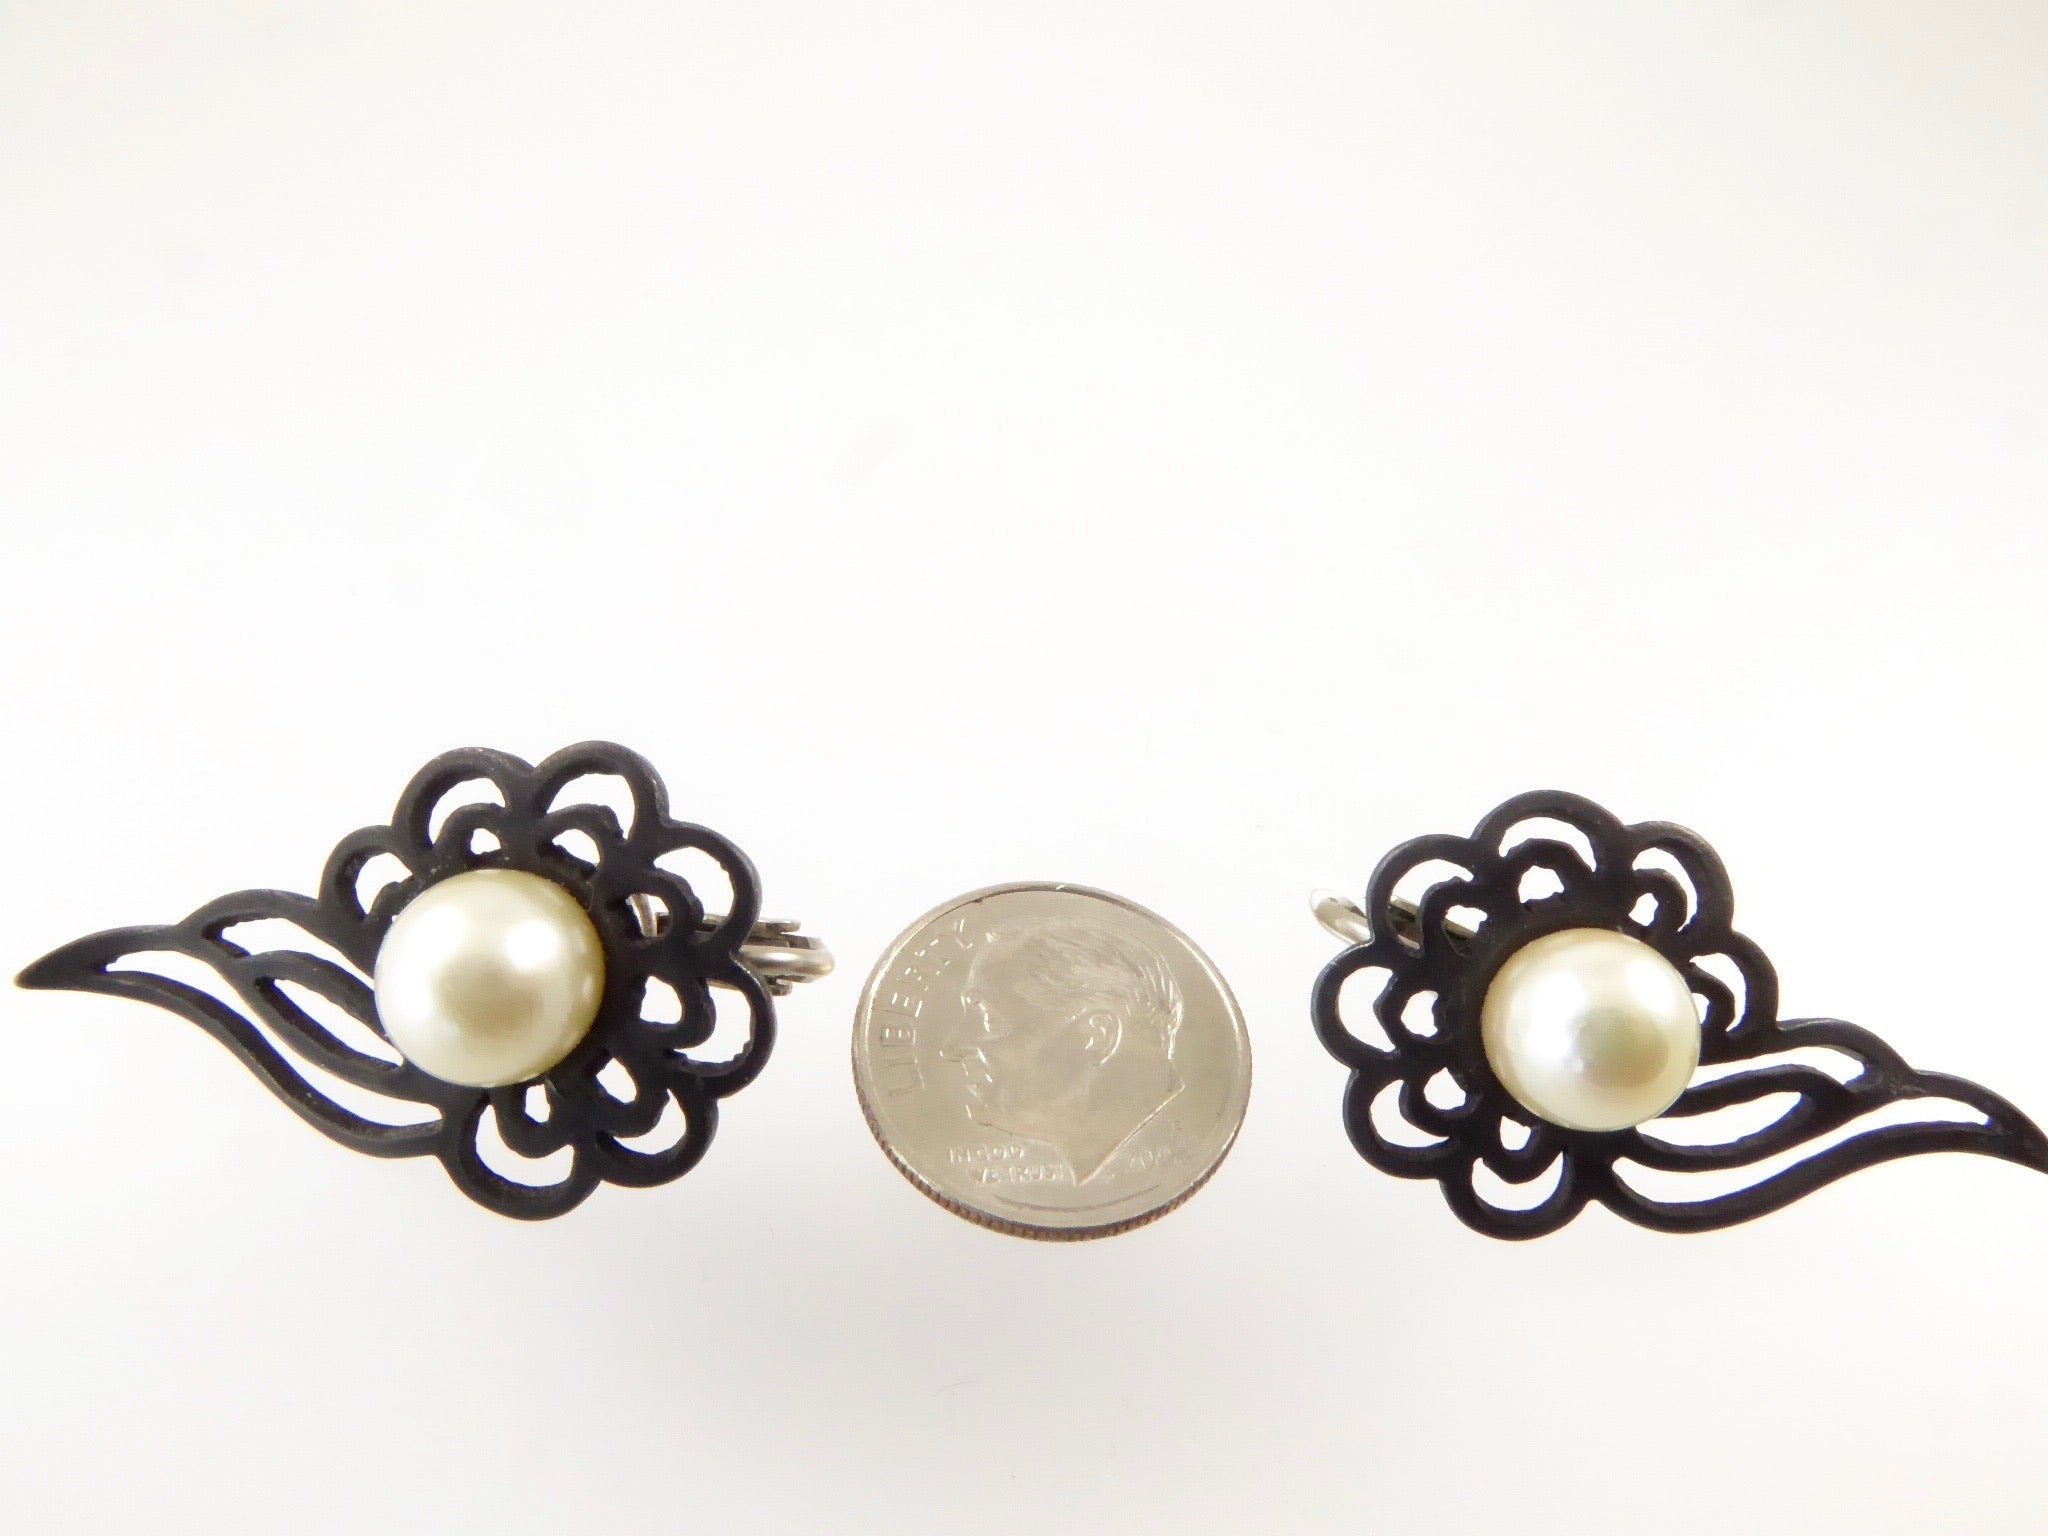 Marsh and Co. Leaf Earrings with Pearls